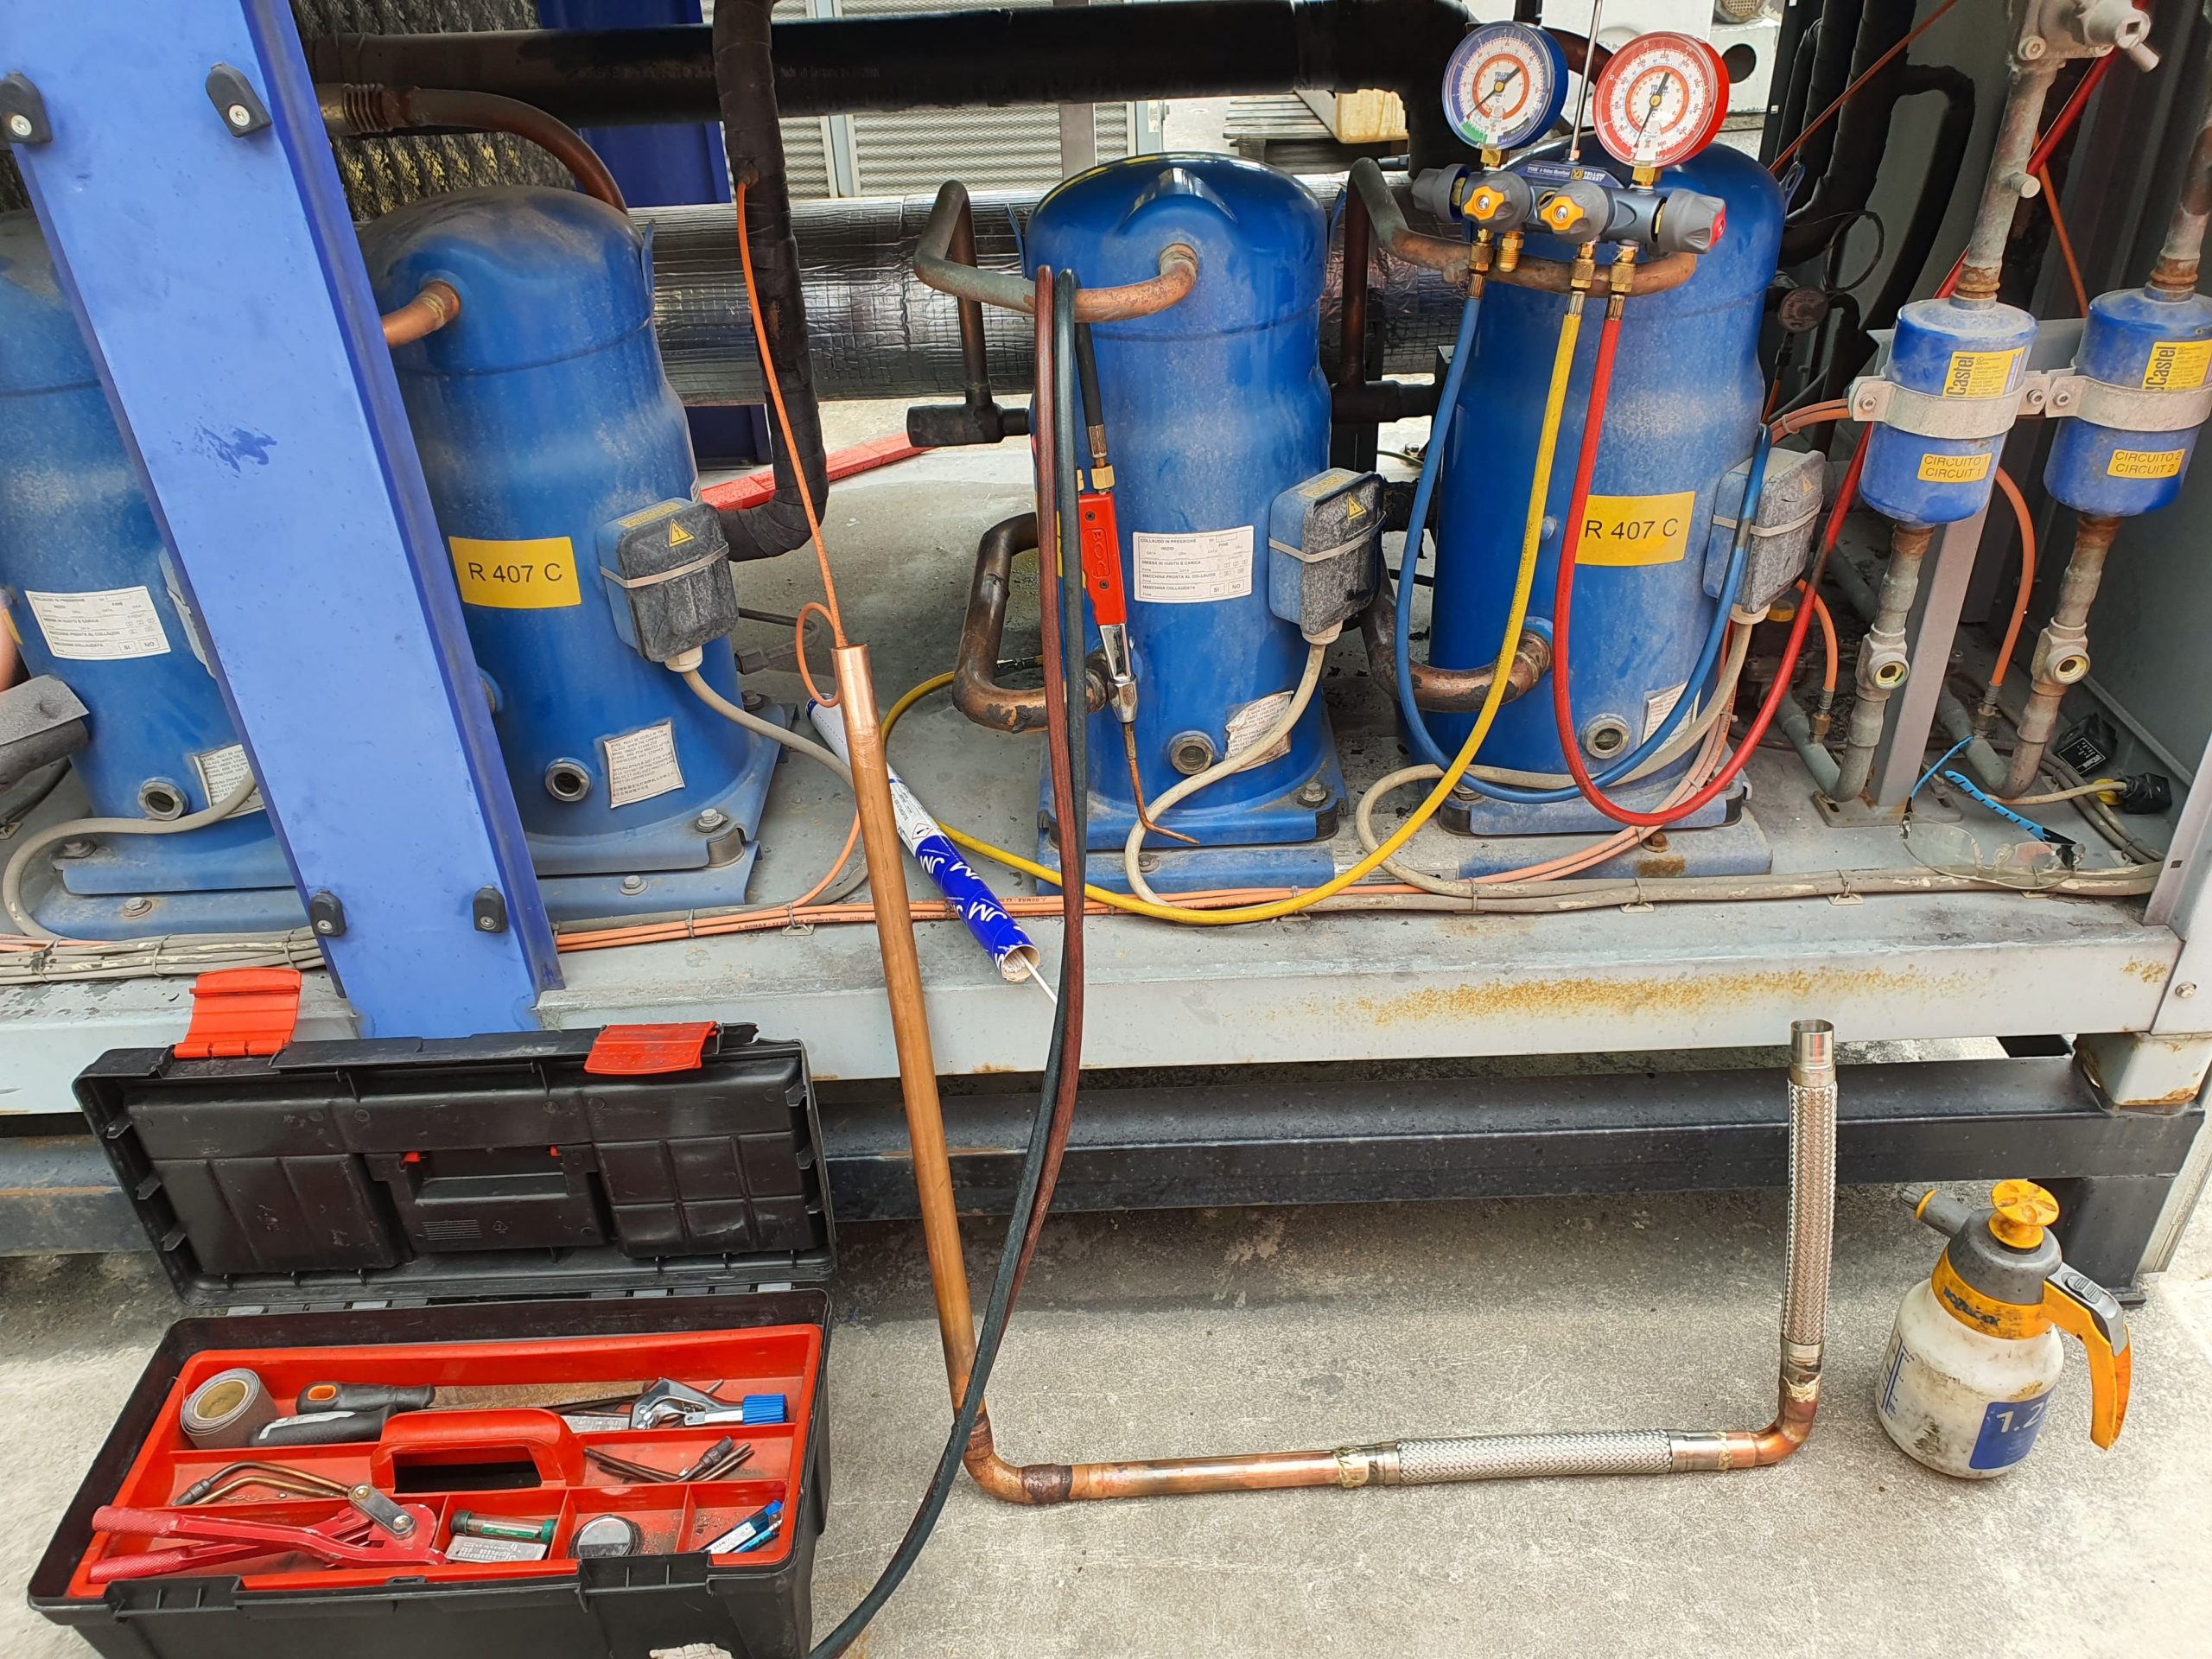 Brazing equipment box and vibration eliminators during packaged chiller service